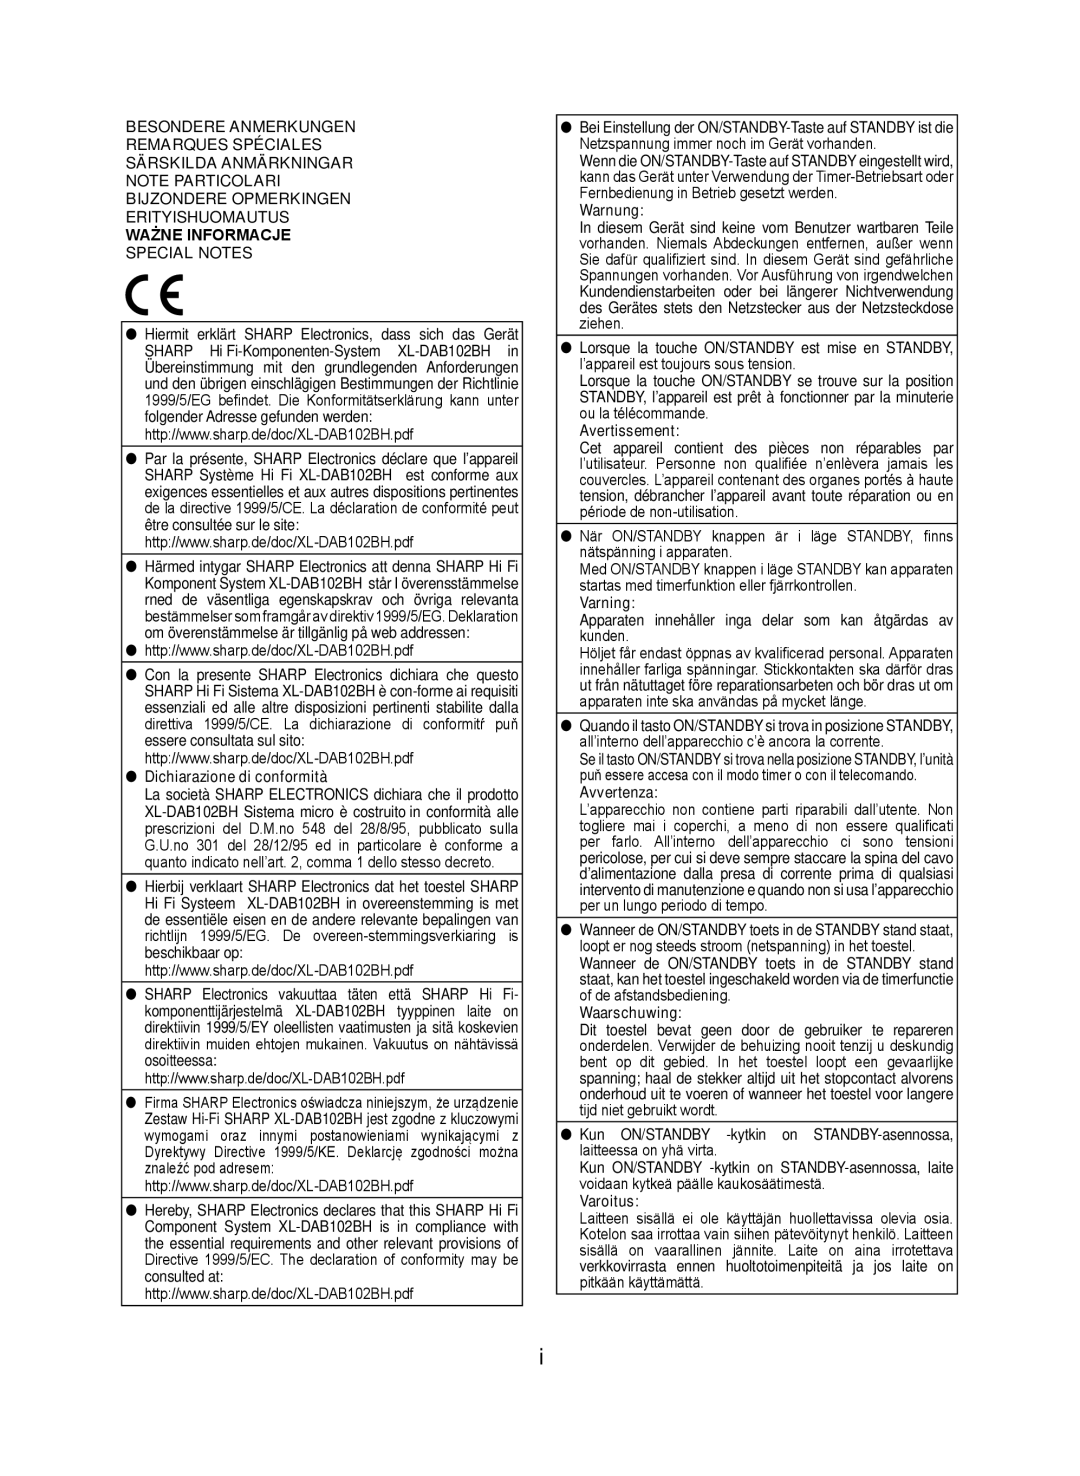 Sharp XL-DAB102DH operation manual Besondere Anmerkungen Remarques Spéciales 